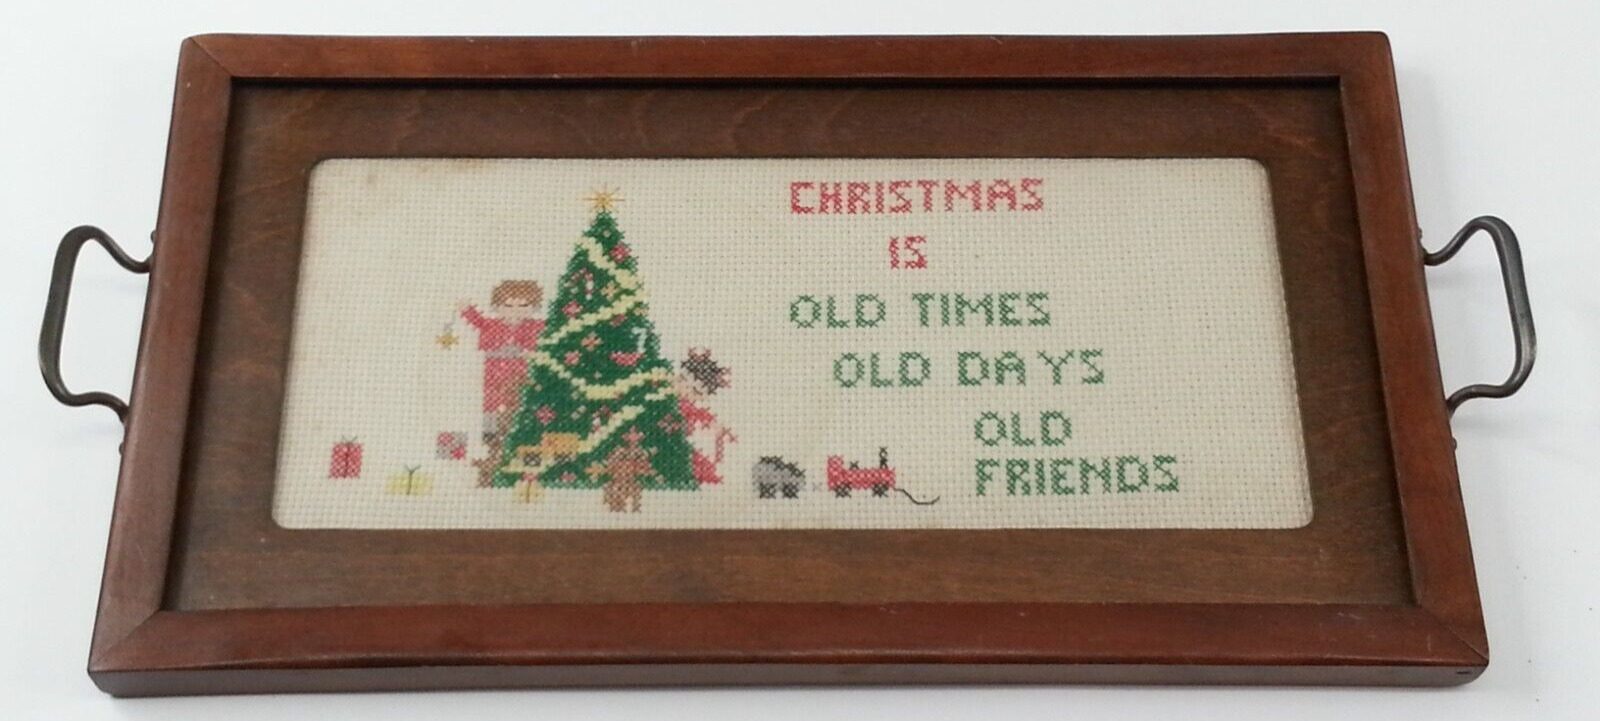 Vintage Christmas Old Times Old Days Old Friends Serving Tray Glass Top Stitched